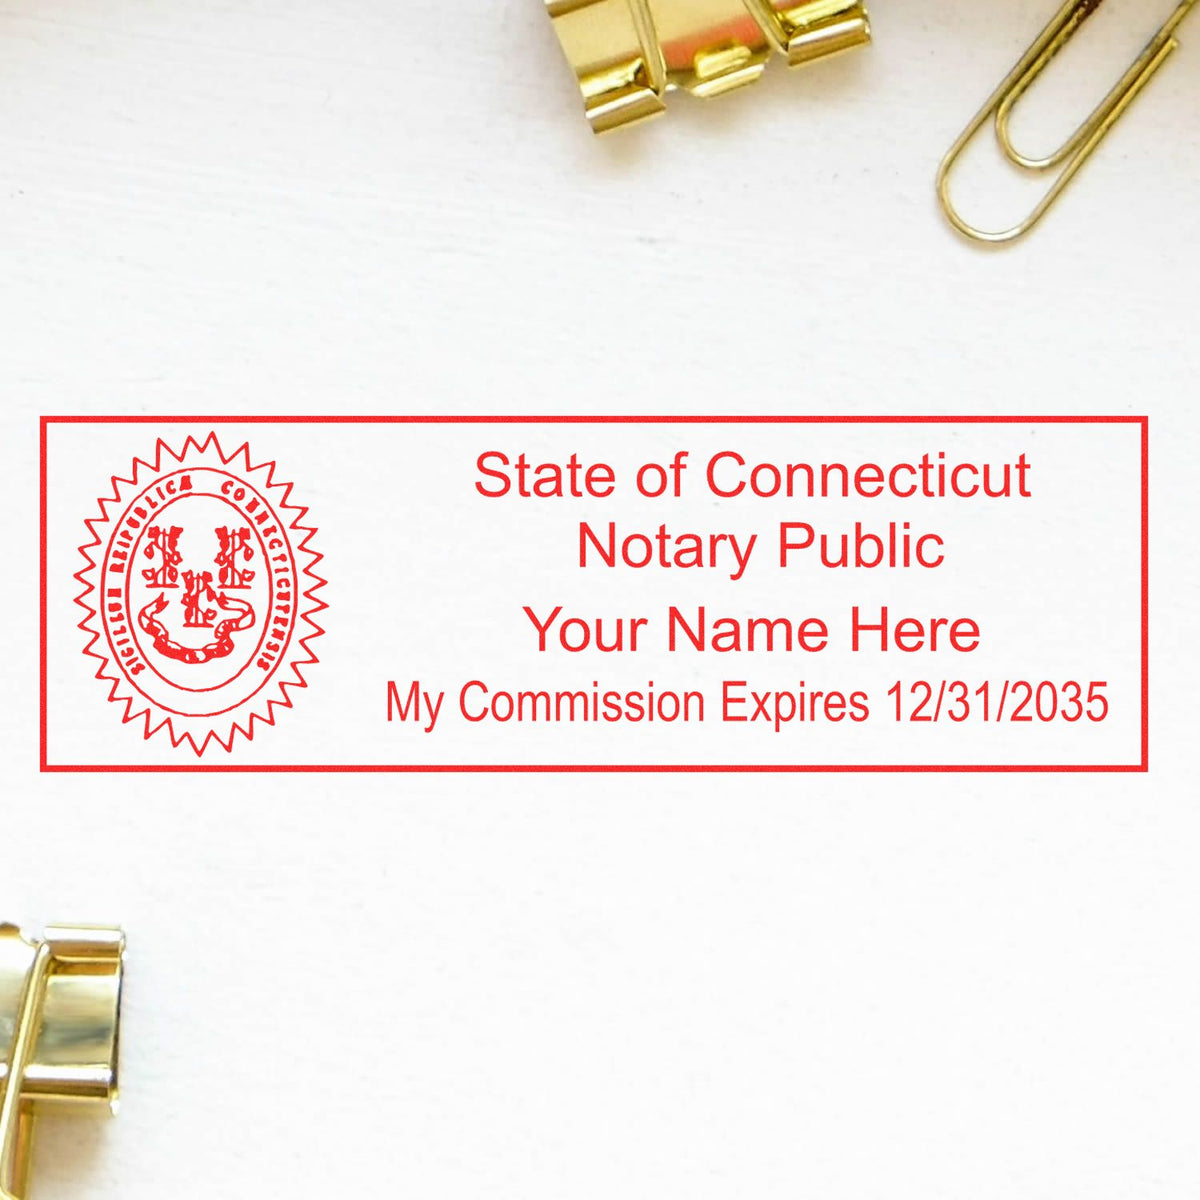 Another Example of a stamped impression of the Super Slim Connecticut Notary Public Stamp on a piece of office paper.